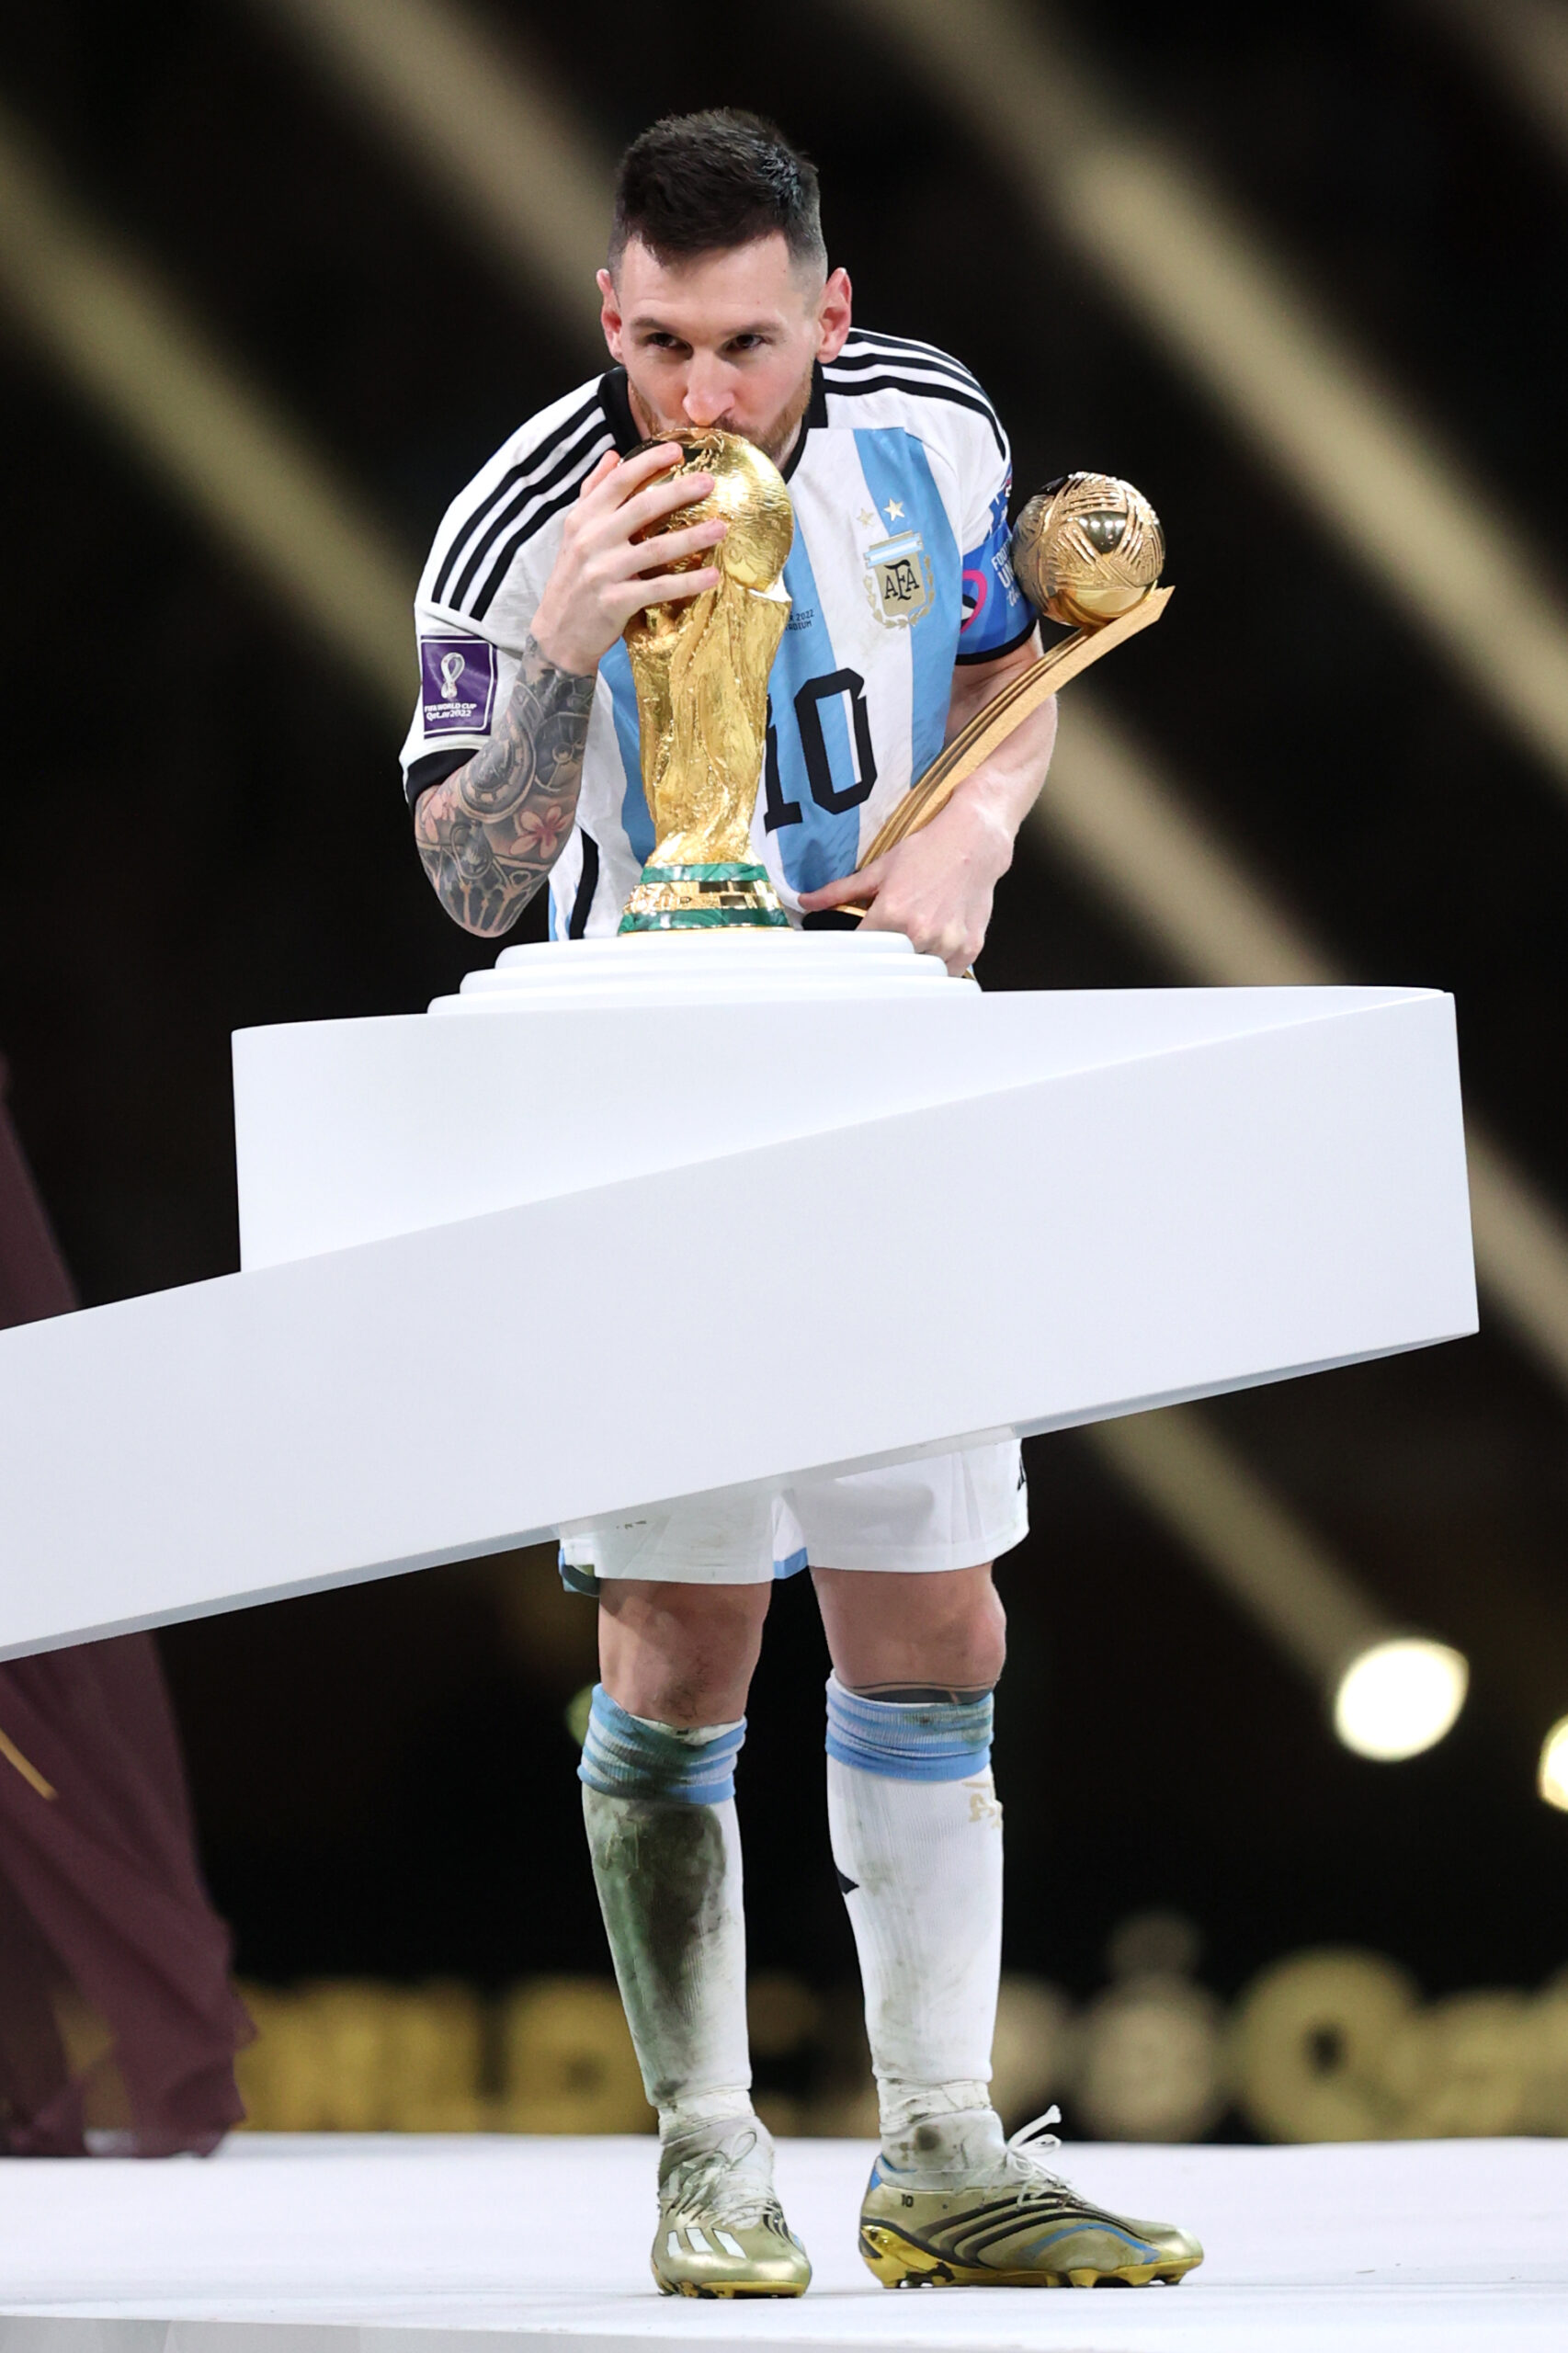 2022/12/messiwithtrophy-scaled.jpg